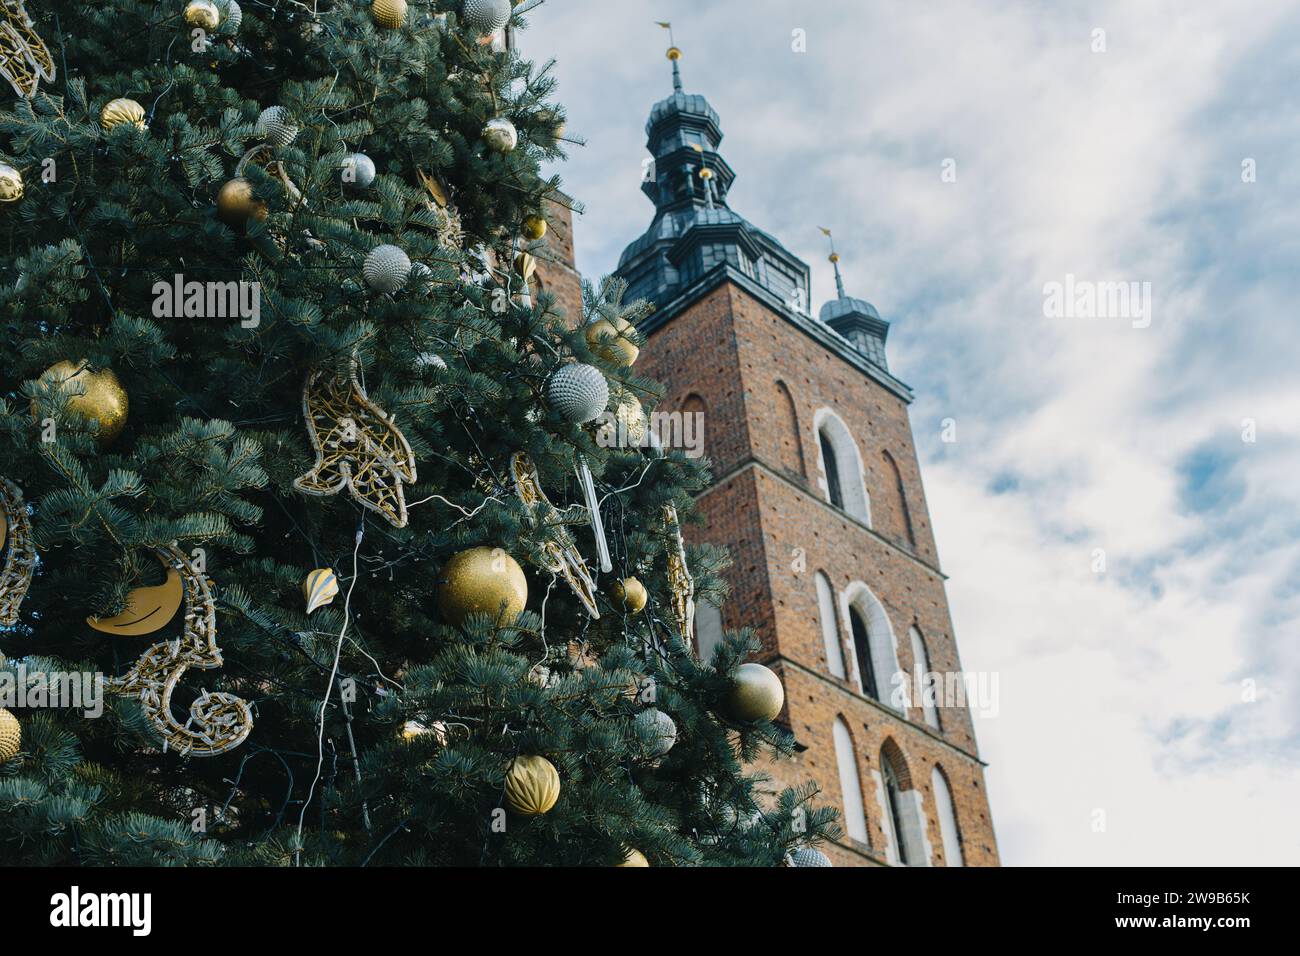 Amazing view of Krakov old town and Christmas tree in a sunny winter day. Travel destination in Poland. Stock Photo